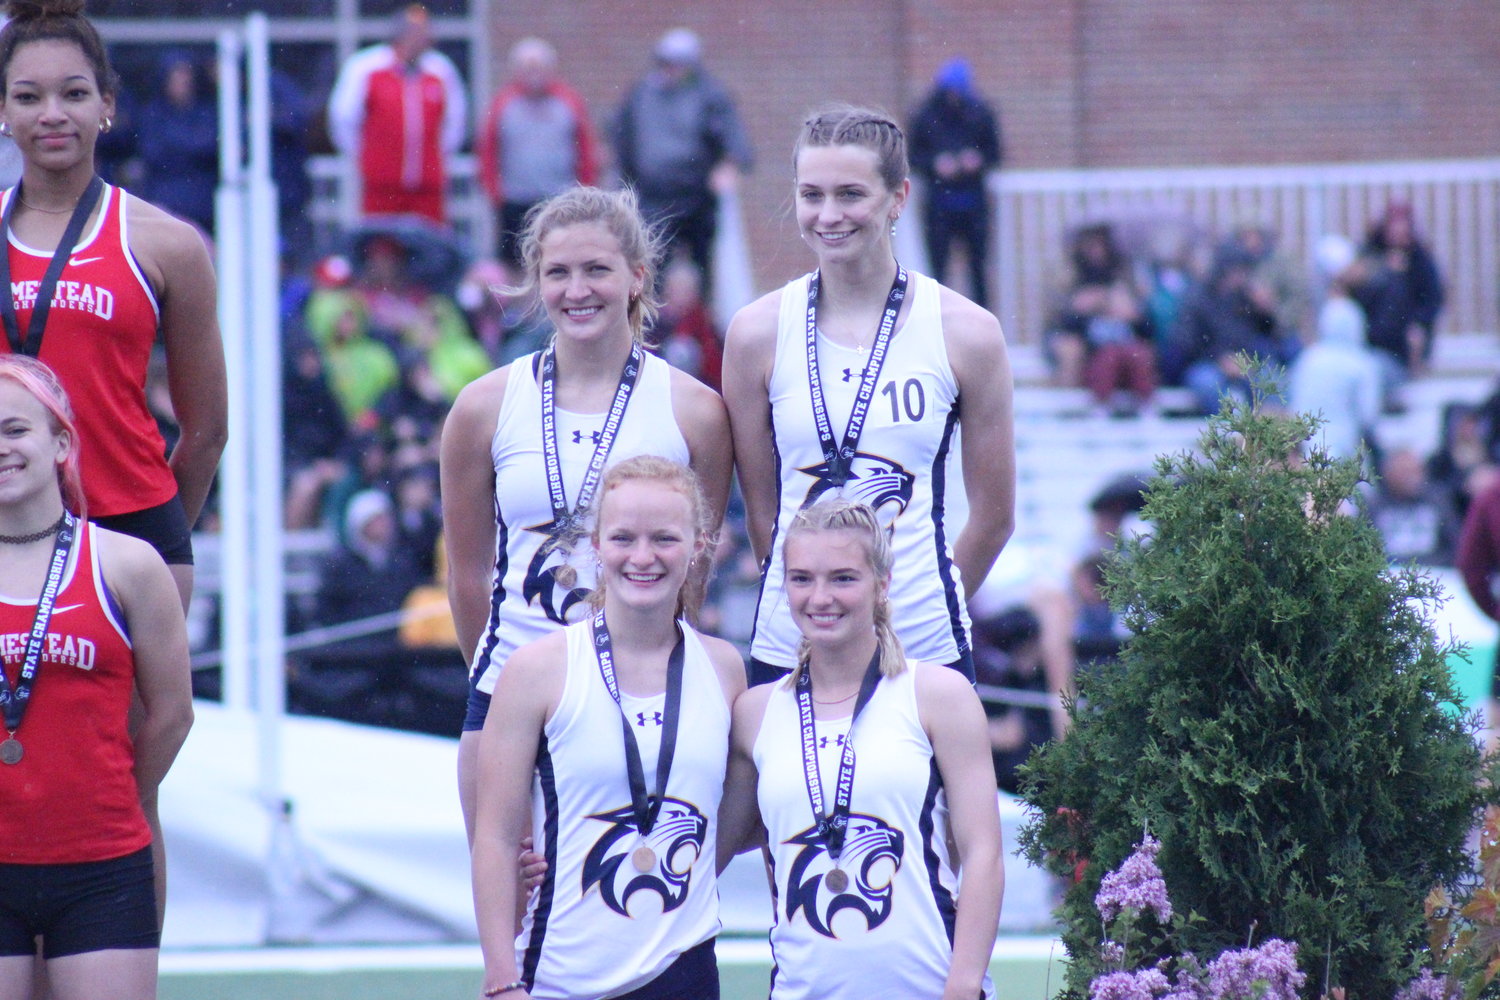 Seniors Elise Frisbie, Morgan Priggie and then-juniors Brooke Silloway and Rebecca Randleman wear their medals on the podium after finishing fifth in the Division 1 4x200 meter relay at the state championships in La Crosse last spring. Both Silloway and Randlemen return for their senior seasons this year.